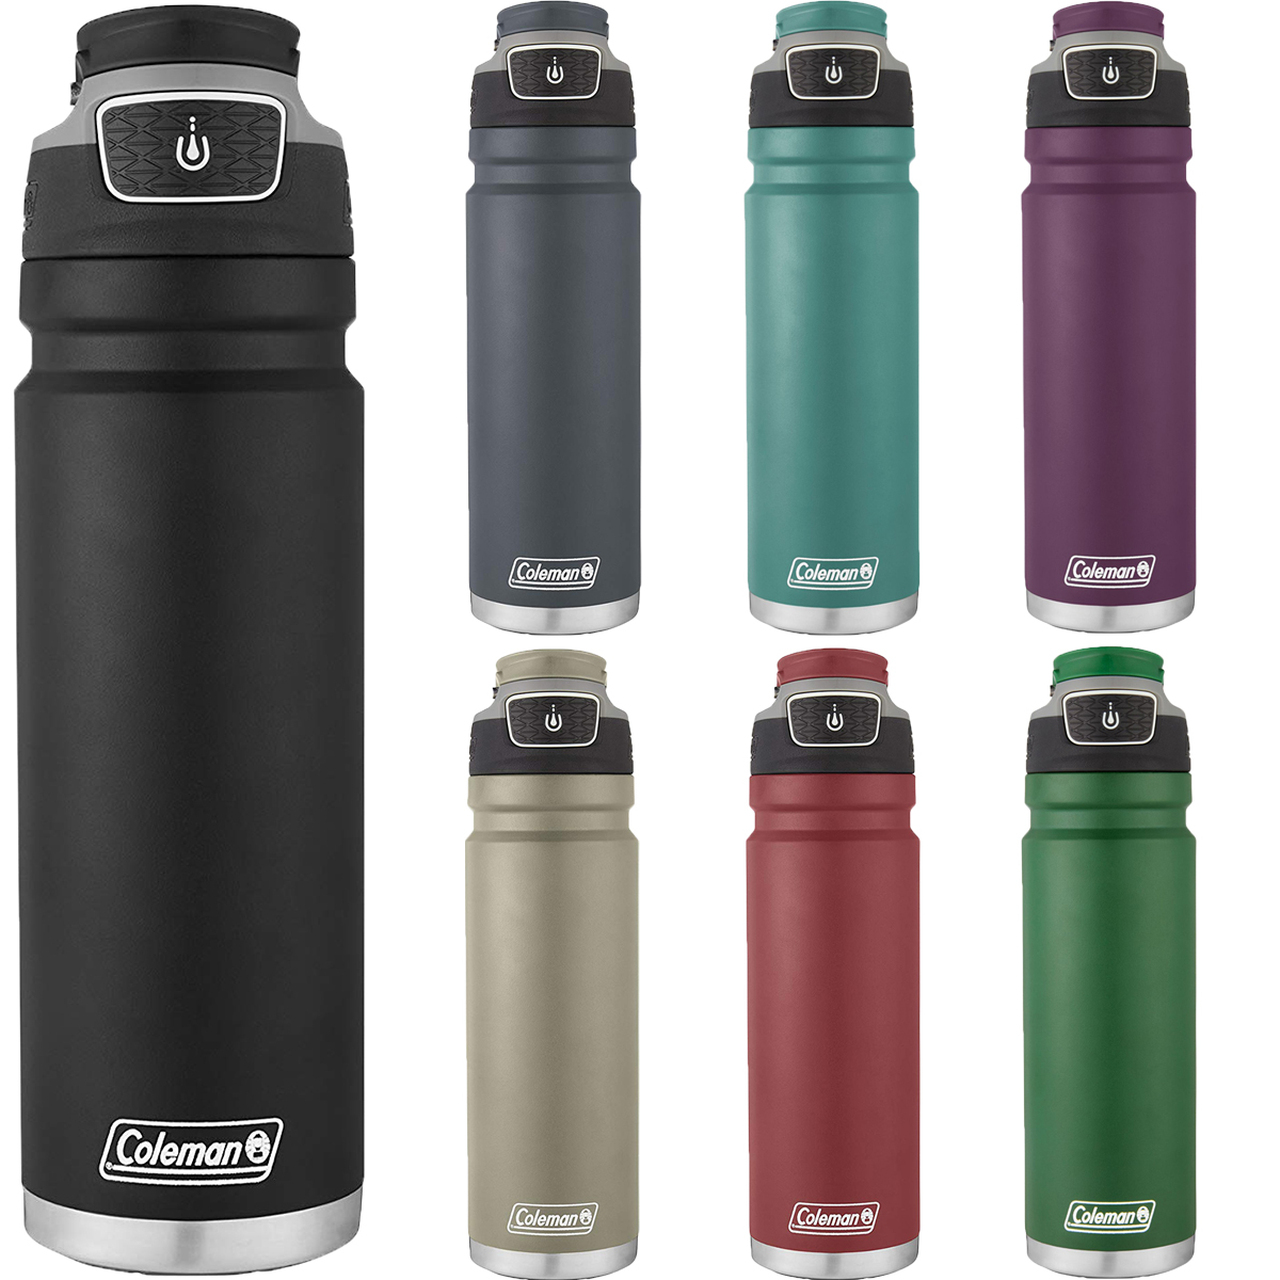 Coleman FreeFlow AUTOSEAL Insulated Stainless Steel Water Bottle, Black, 24  oz. : Amazon.co.uk: Sports & Outdoors